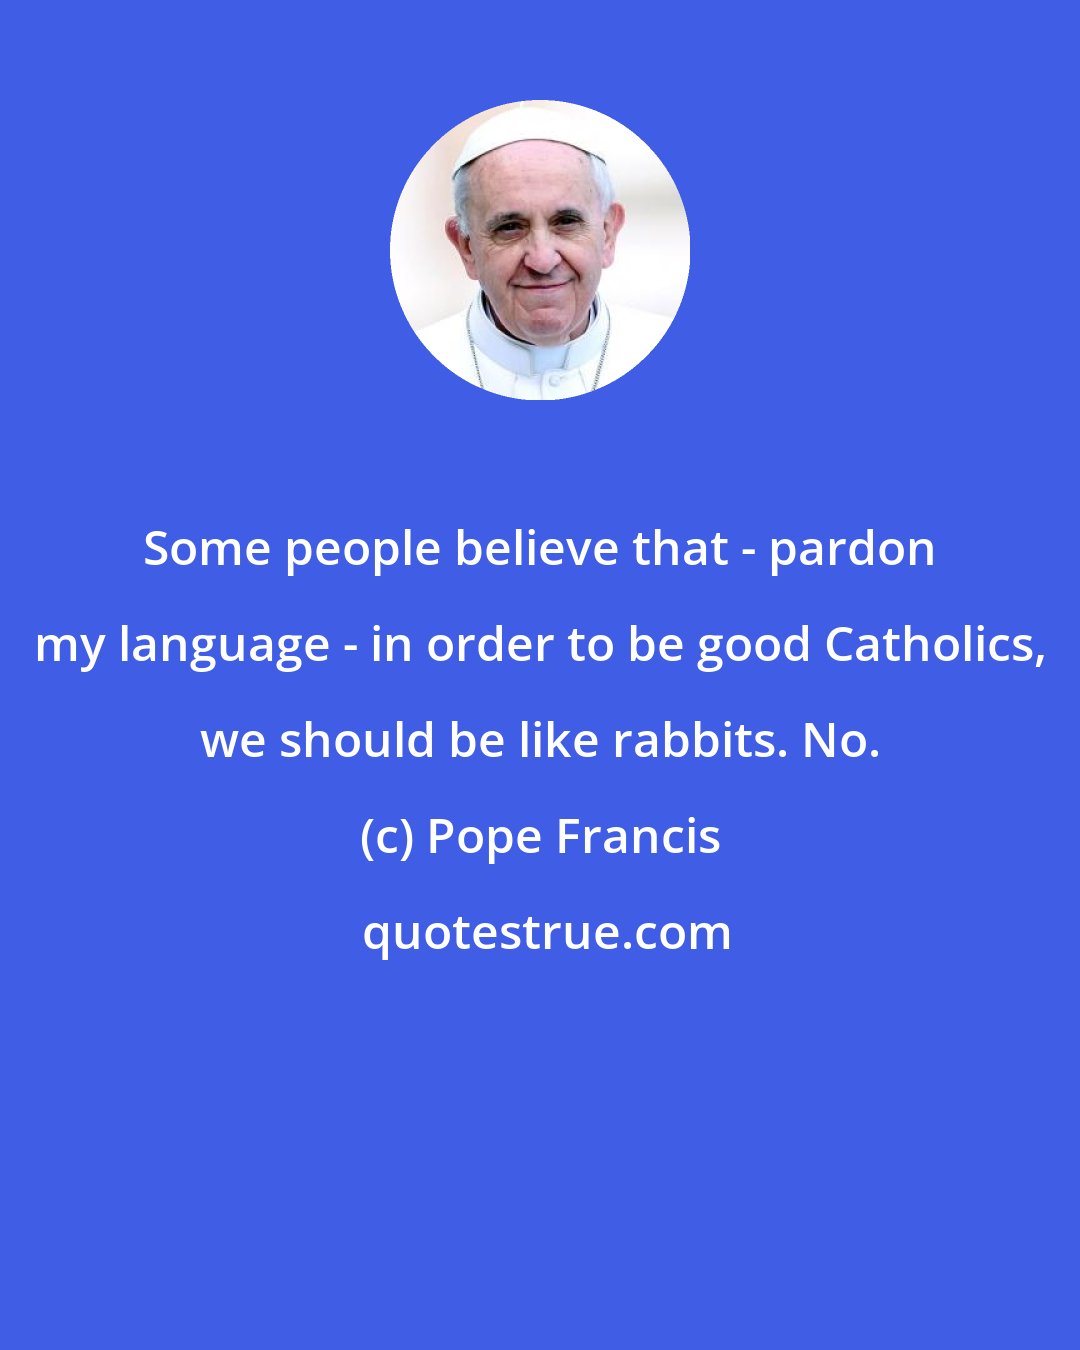 Pope Francis: Some people believe that - pardon my language - in order to be good Catholics, we should be like rabbits. No.